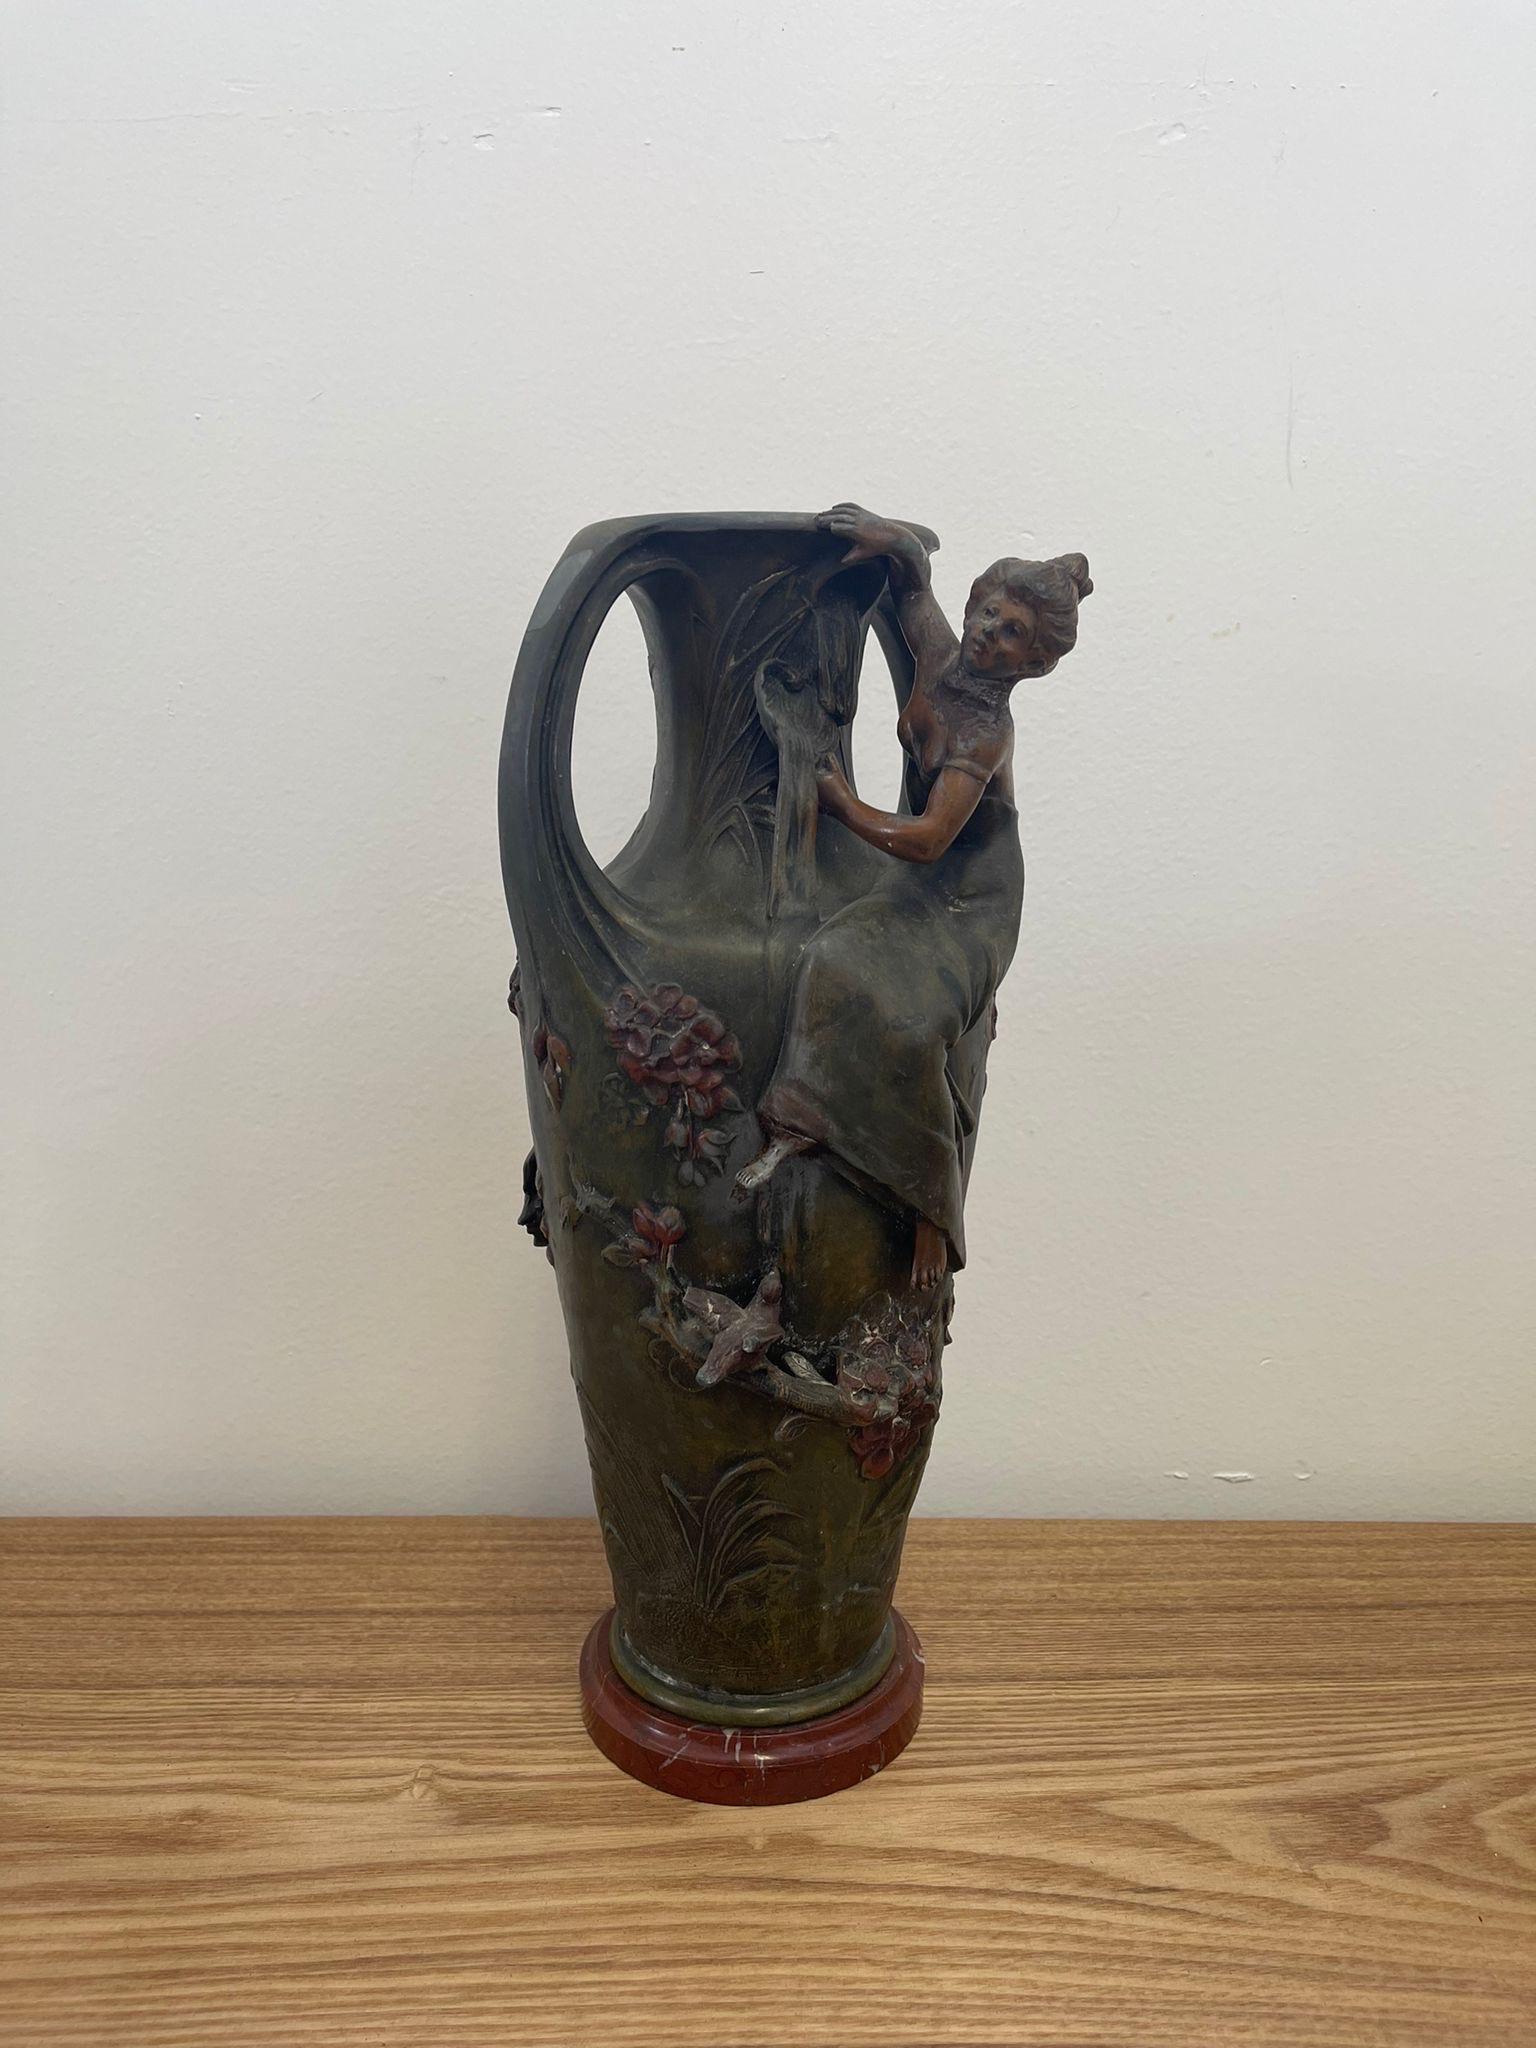 This Vase has gorgeous Petina around the female sculpture. It gives the illusion that she is climbing up the vines that wrap around the vase. Possibly early 1900s. Marble or stone base, unable to confirm. Vintage Condition Consistent with Age as